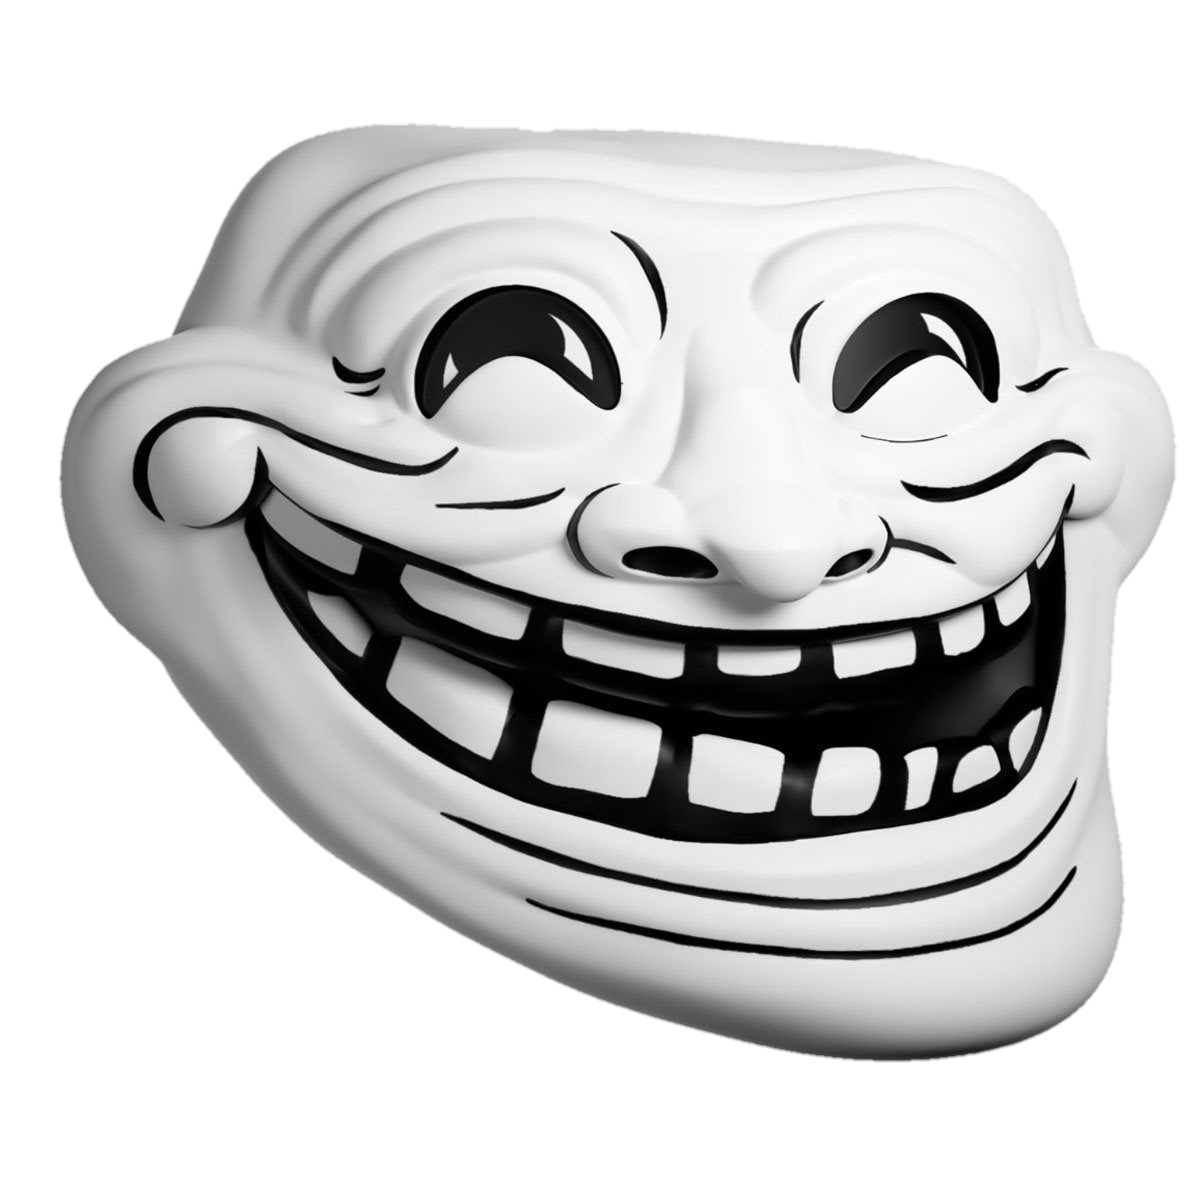 trollface-png-from-pngfre-12